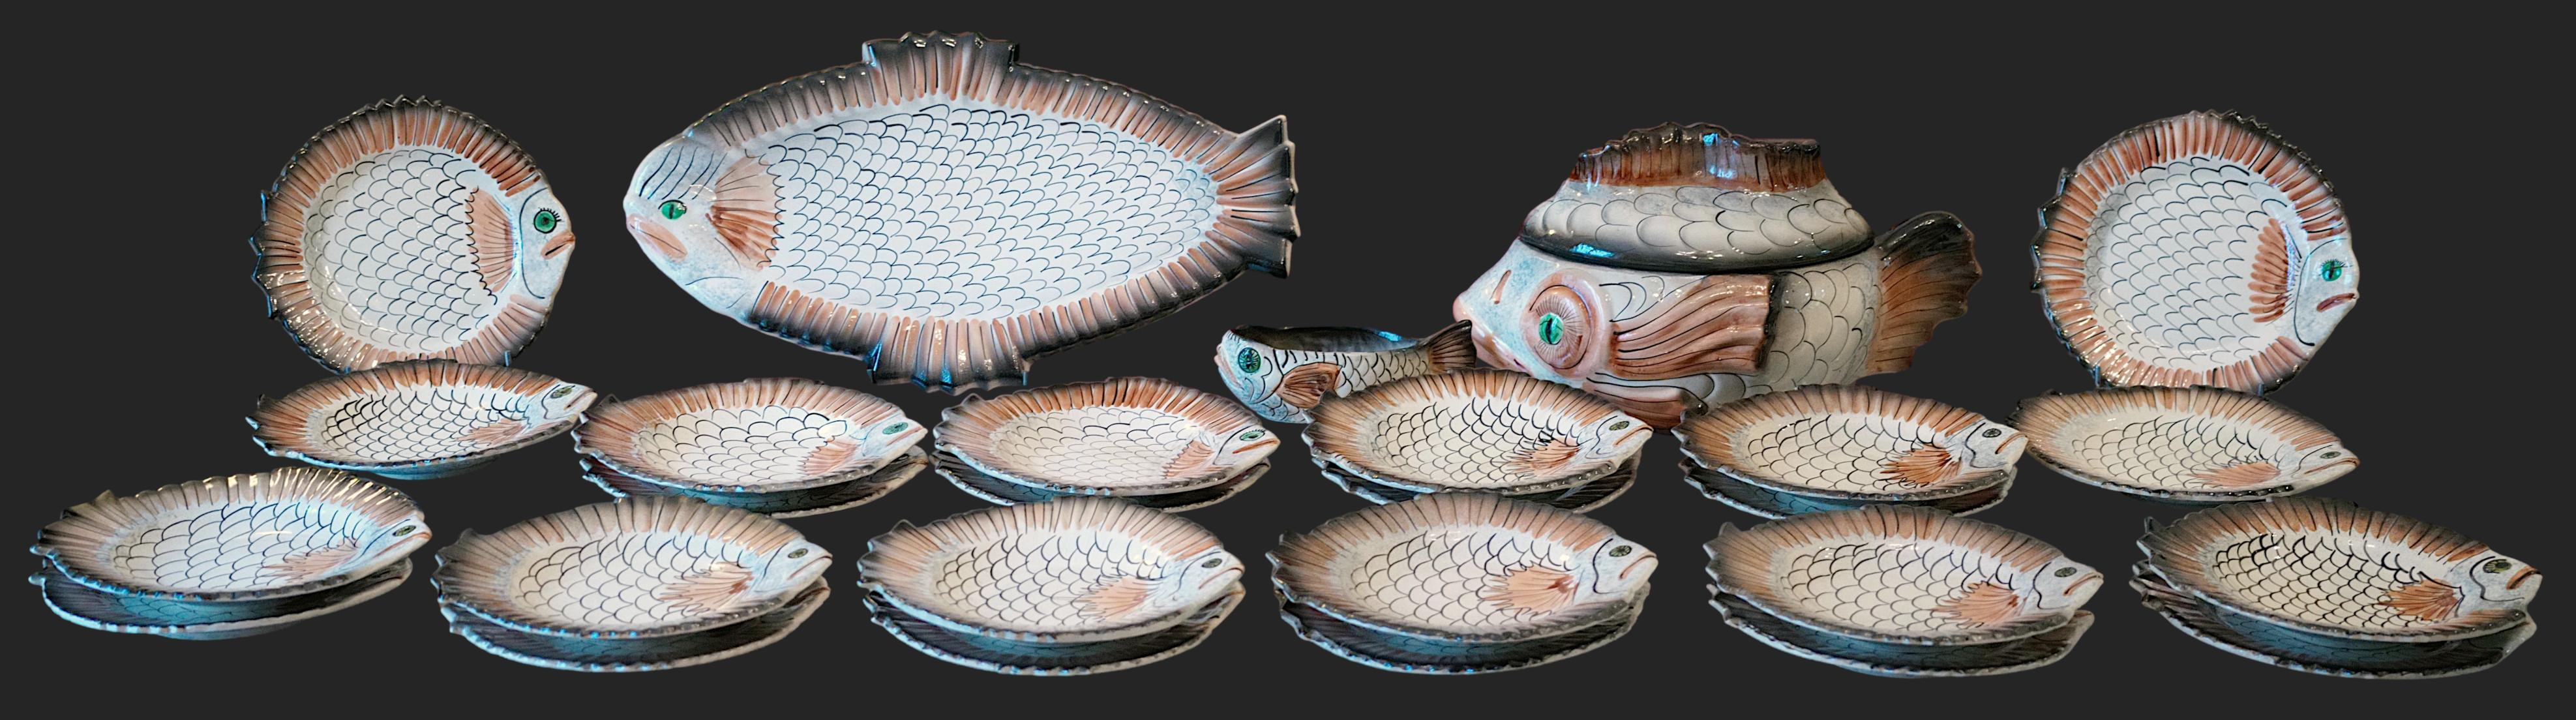 French Mid-century ceramic fish dinner set by VALLAURIS, France, 1970s. 1 tureen, 1 sauce boat, 12 soup plates and 12 dinner plates. Tureen : L43xH22.5xP25.5 cm - W16.9xH8.9xD10 in. Platter : L55.5xH3xP31 cm - W21.85xH1.2xD12.2 in. Sauce boat :